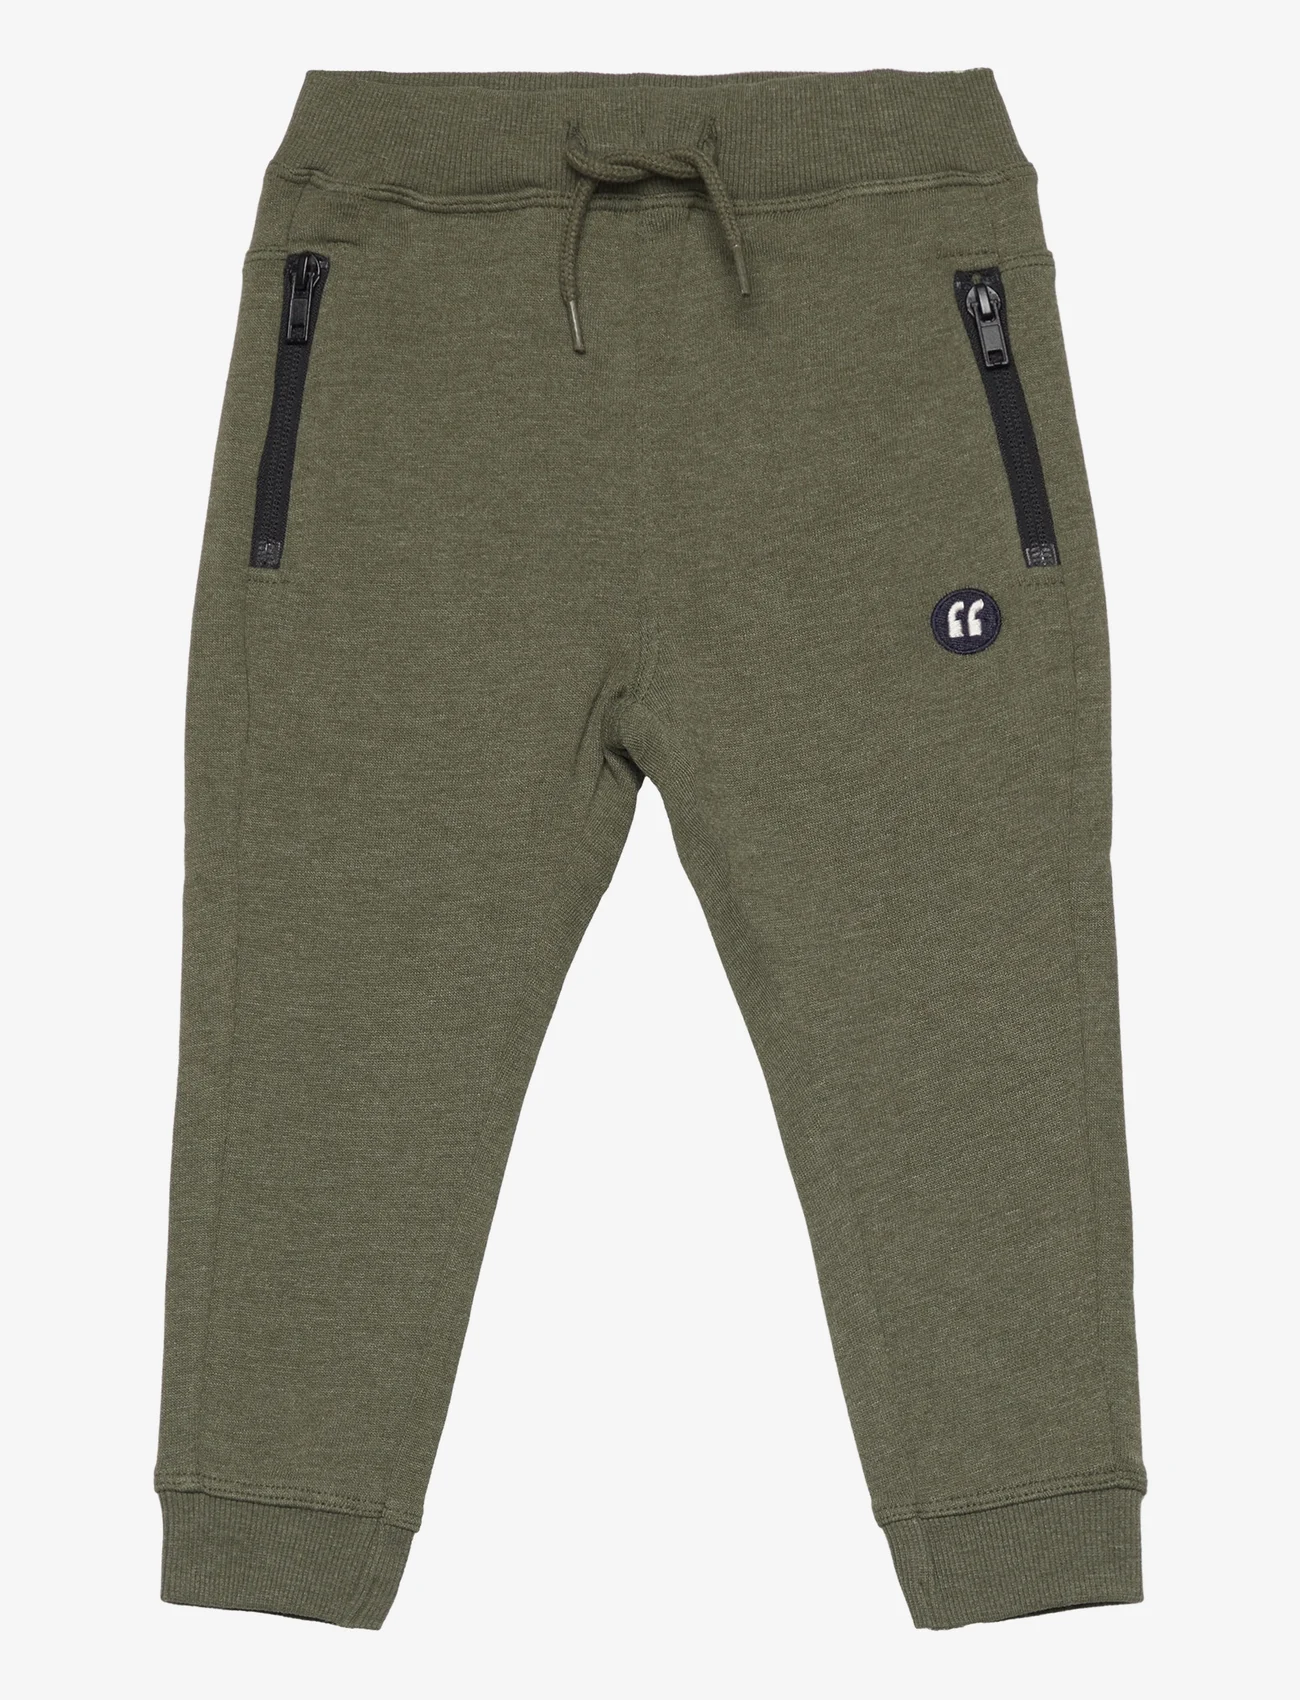 name it - NMMVIMO SWE PANT BRU NOOS - lowest prices - rifle green - 0